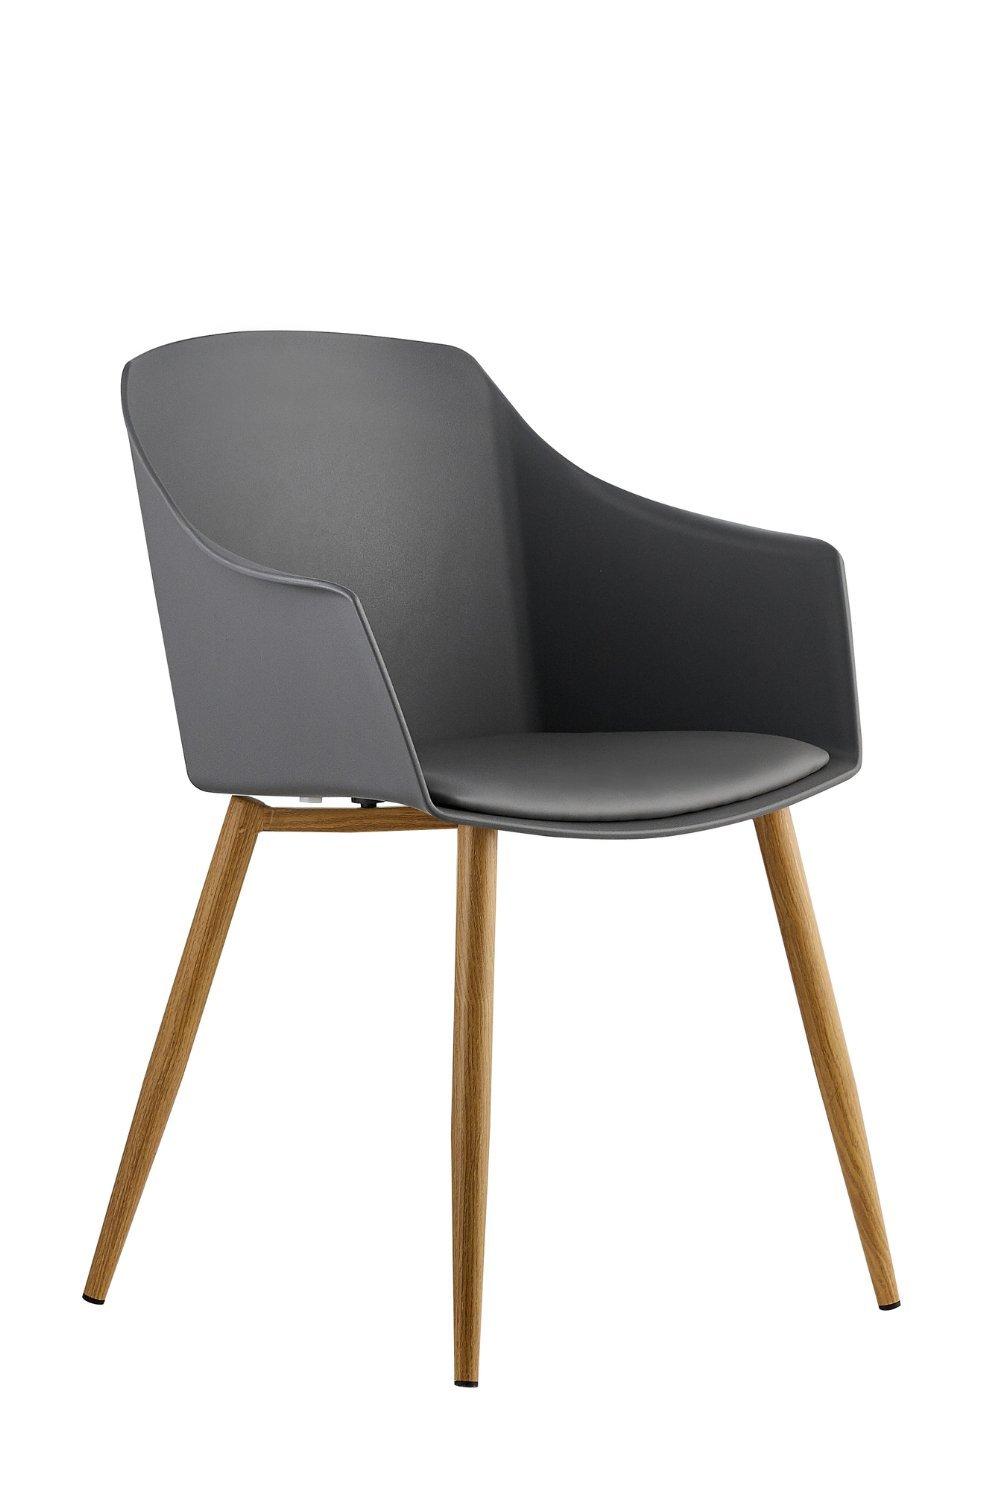 Single 'Eden Dining Chairs' with Leather Cushions Dining Armchair